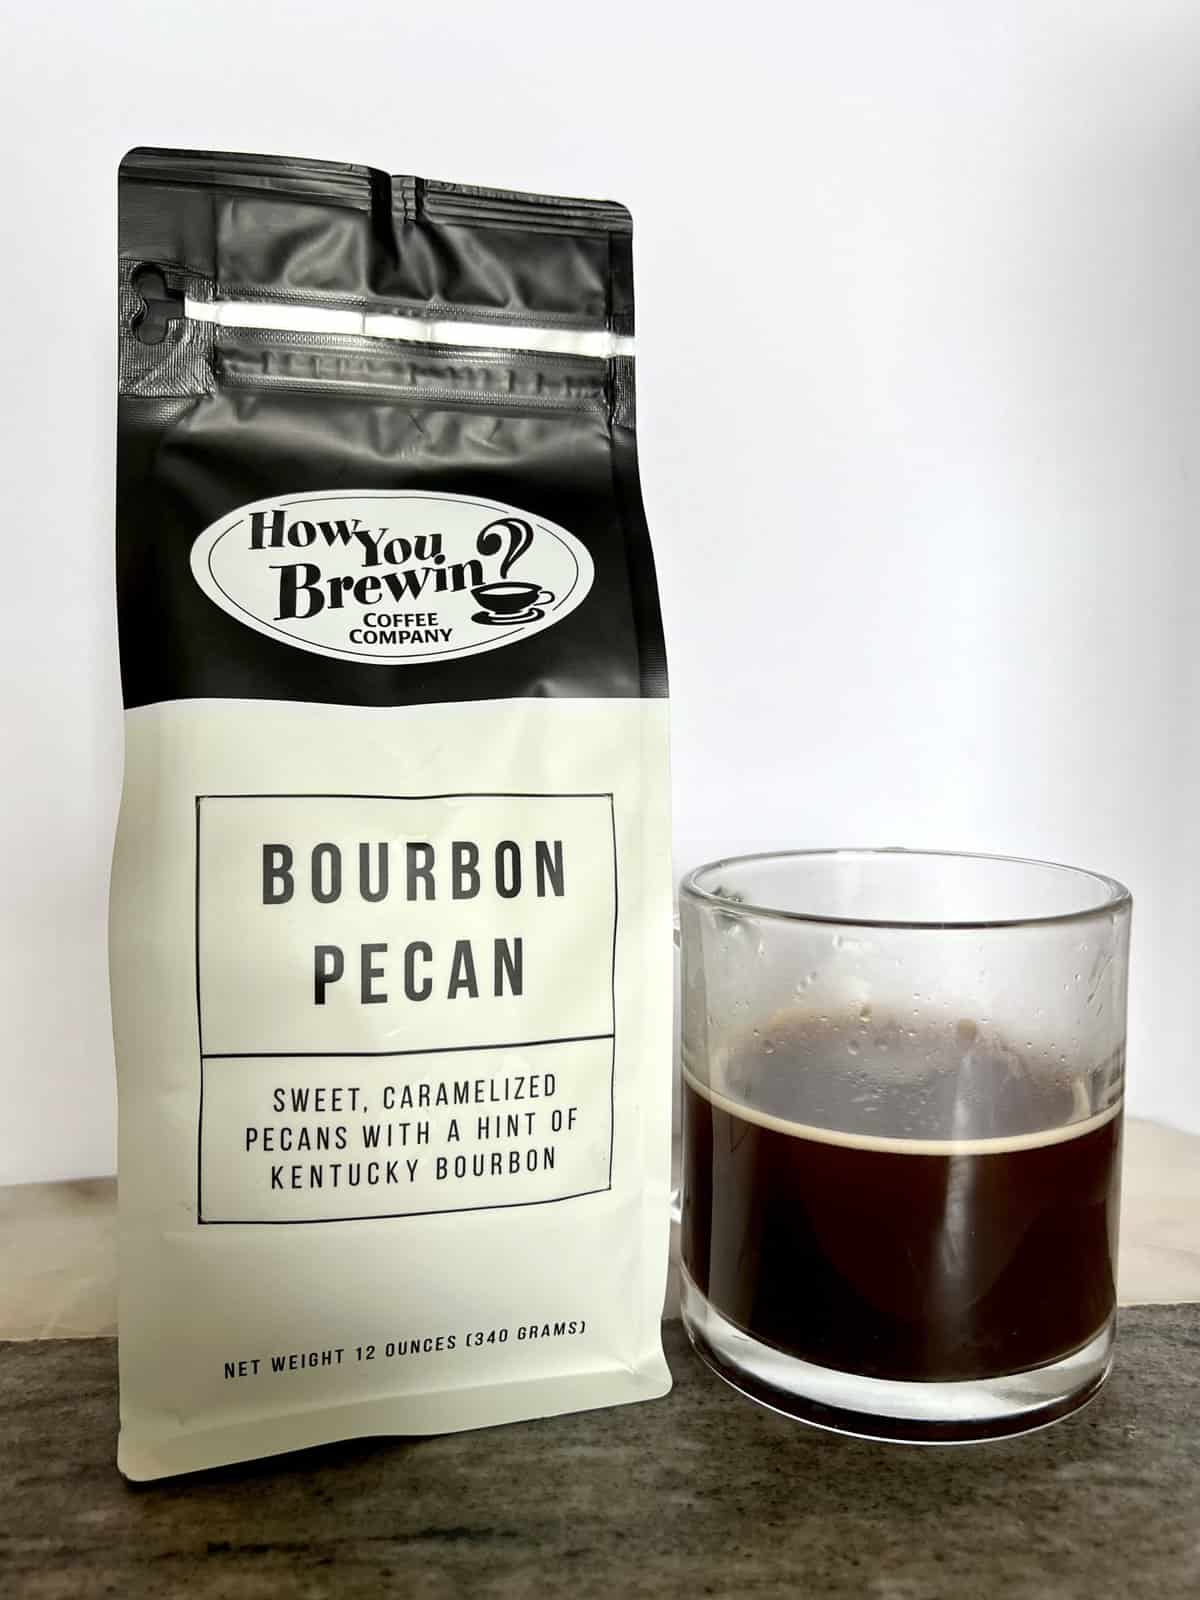 a-package-of-Bourbon-Pecan-coffee-stands-next-to-a-brewed-cup-of-coffee-scaled